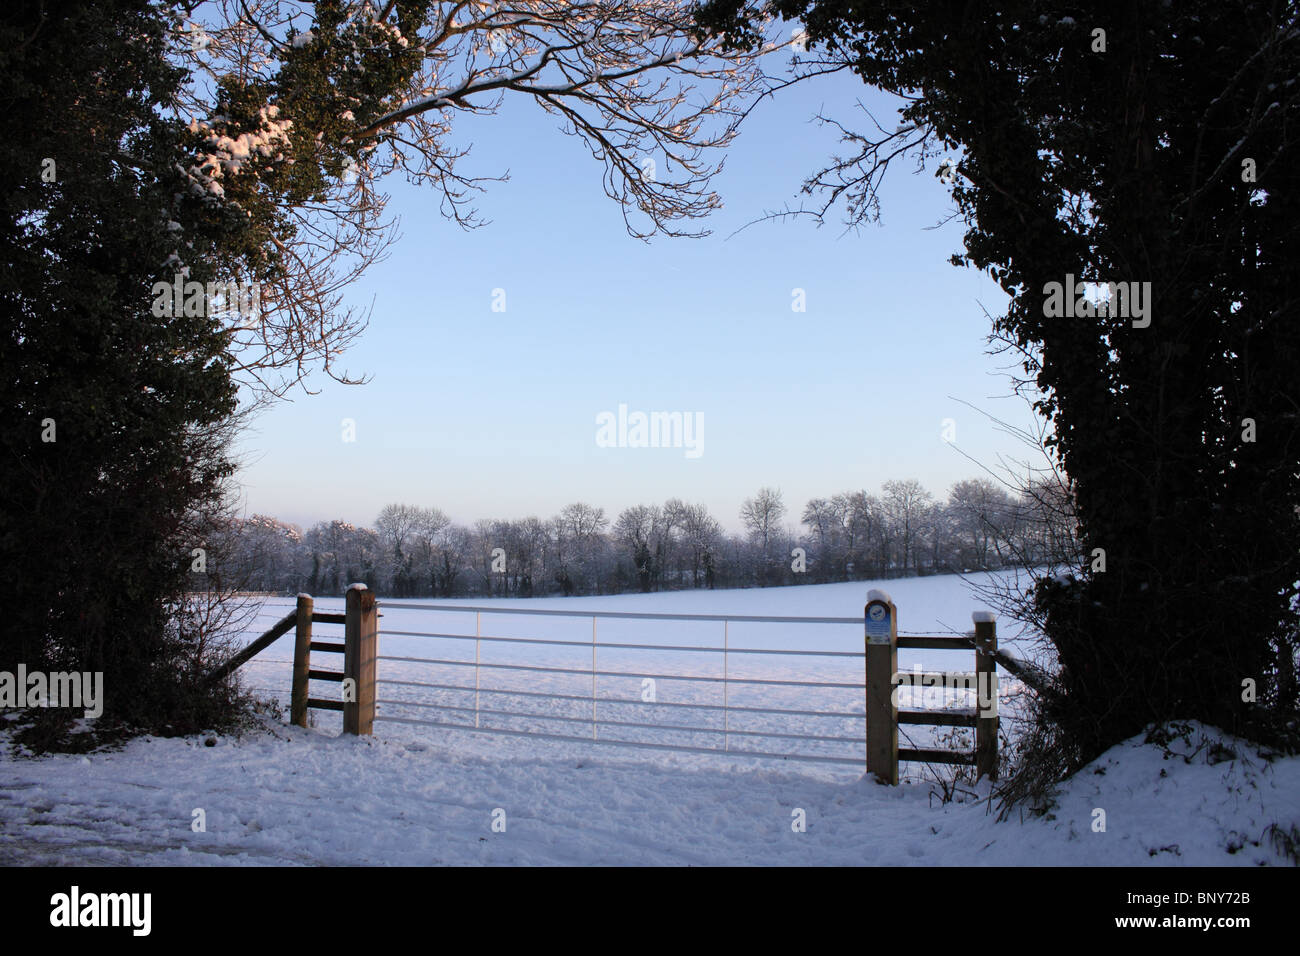 Gateway through hedgerow onto open fields in deep snow, Kidmore End Lane, Sonning Common, Oxfordshire, England, UK Stock Photo